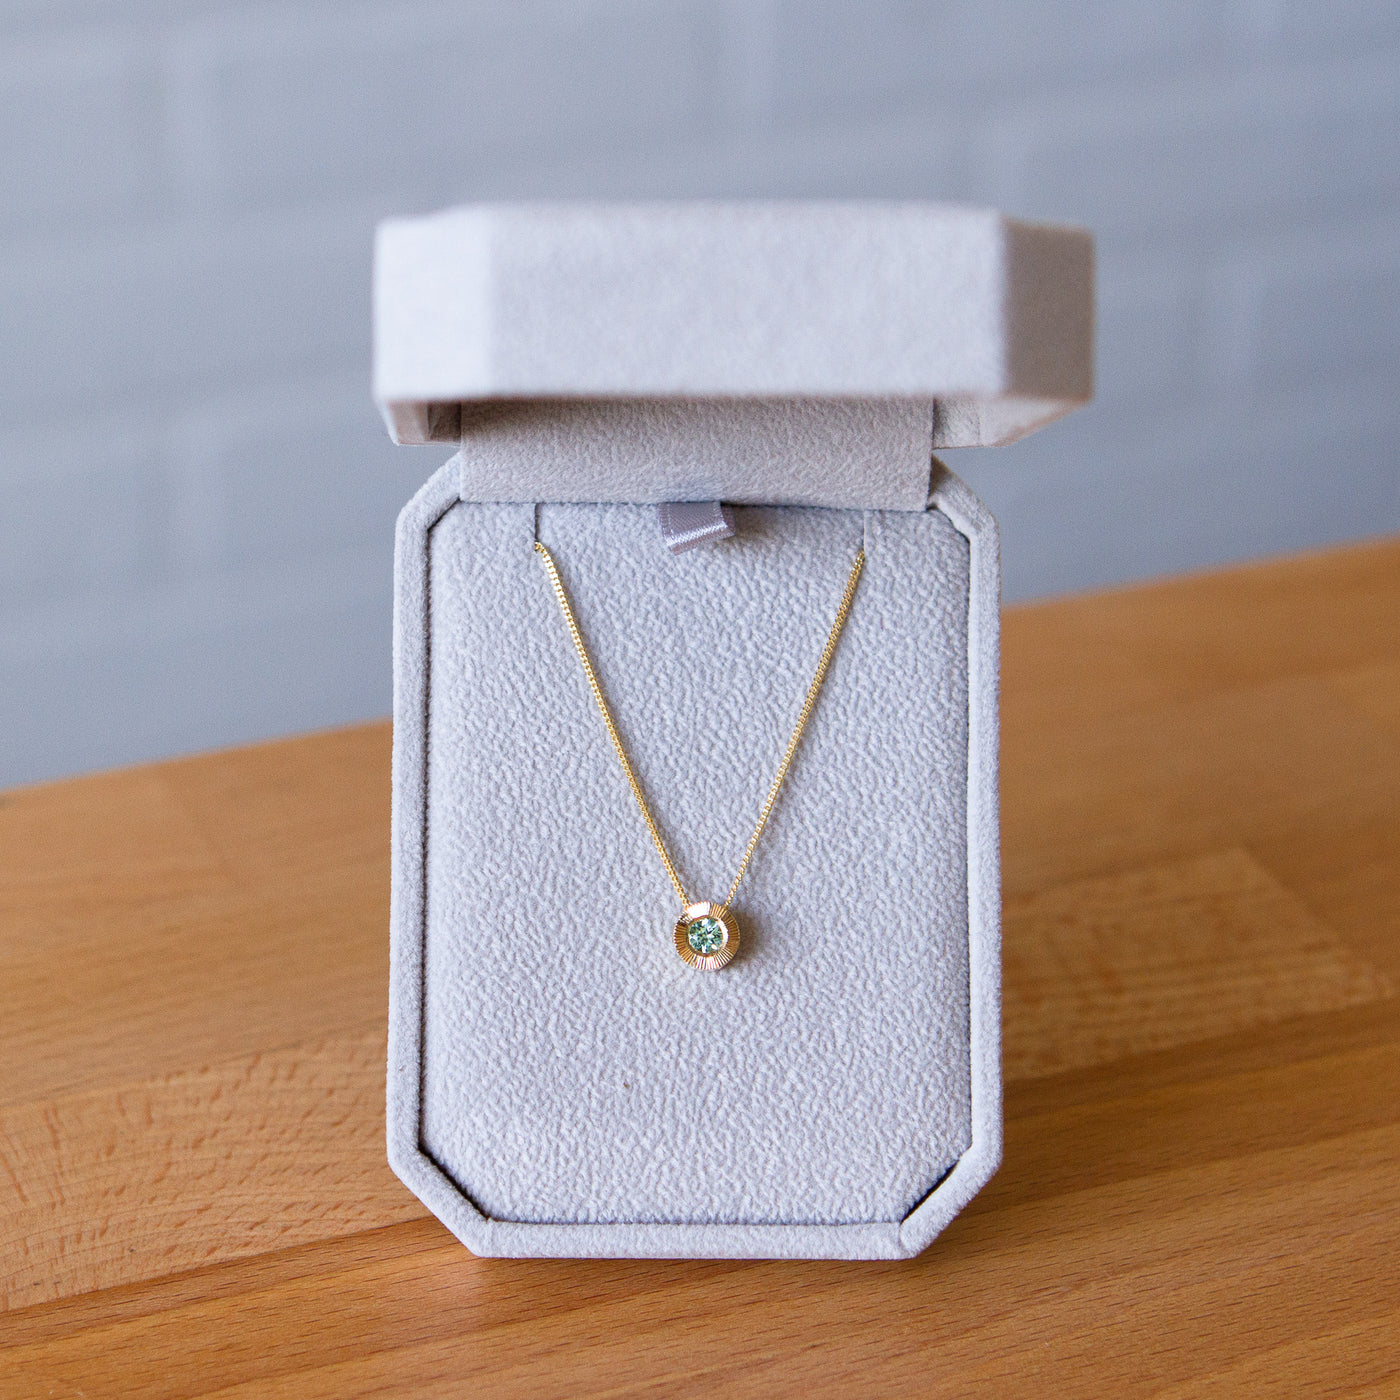 14k yellow gold medium Aurora necklace with a round seafoam green tourmaline center and engraved rays halo border in a gift box